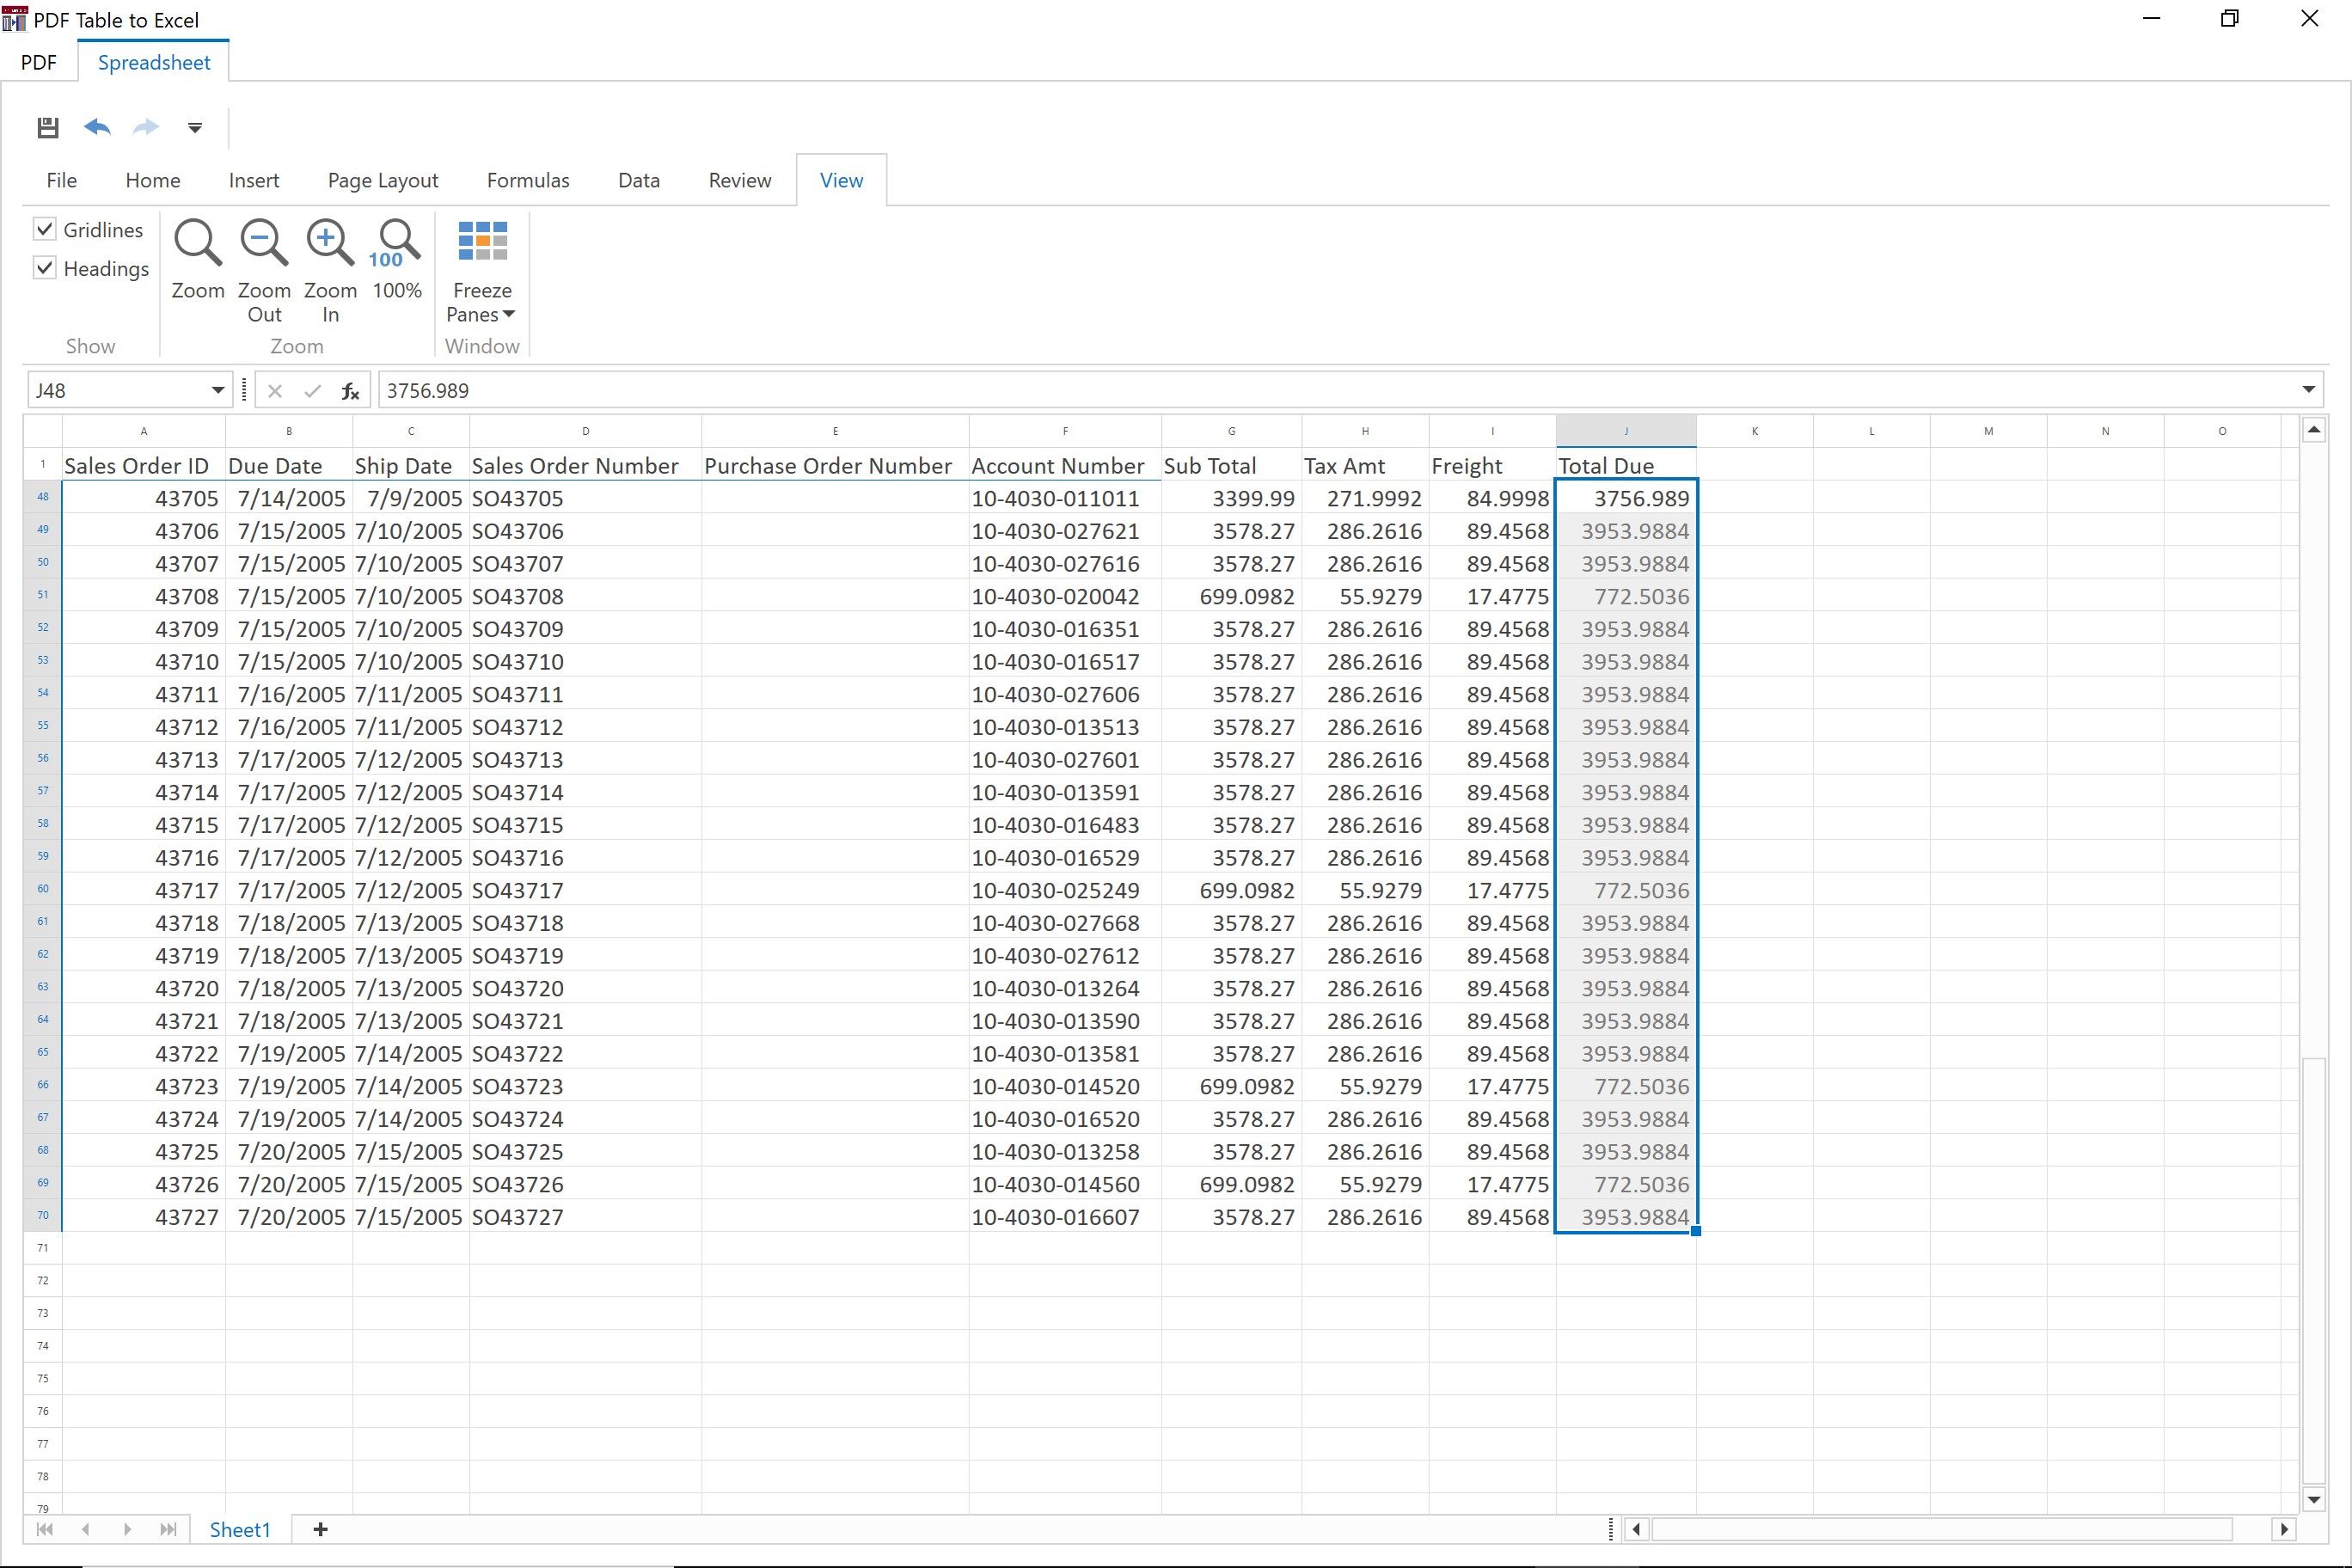 The spreadsheet display as additional pages are transferred.